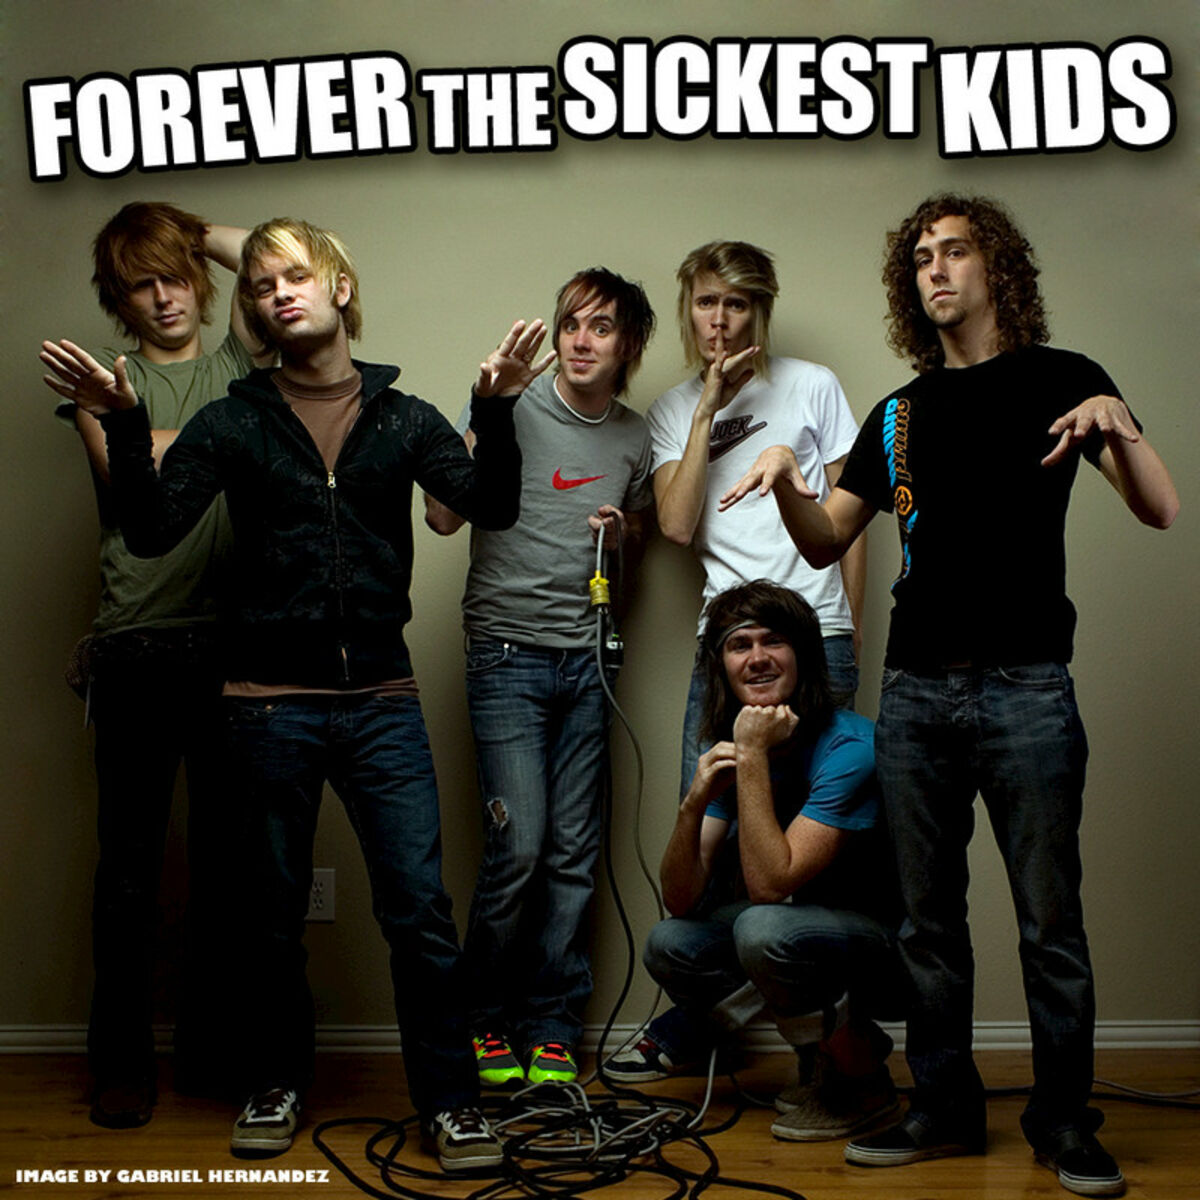 Forever The Sickest Kids: albums, songs, playlists | Listen on Deezer